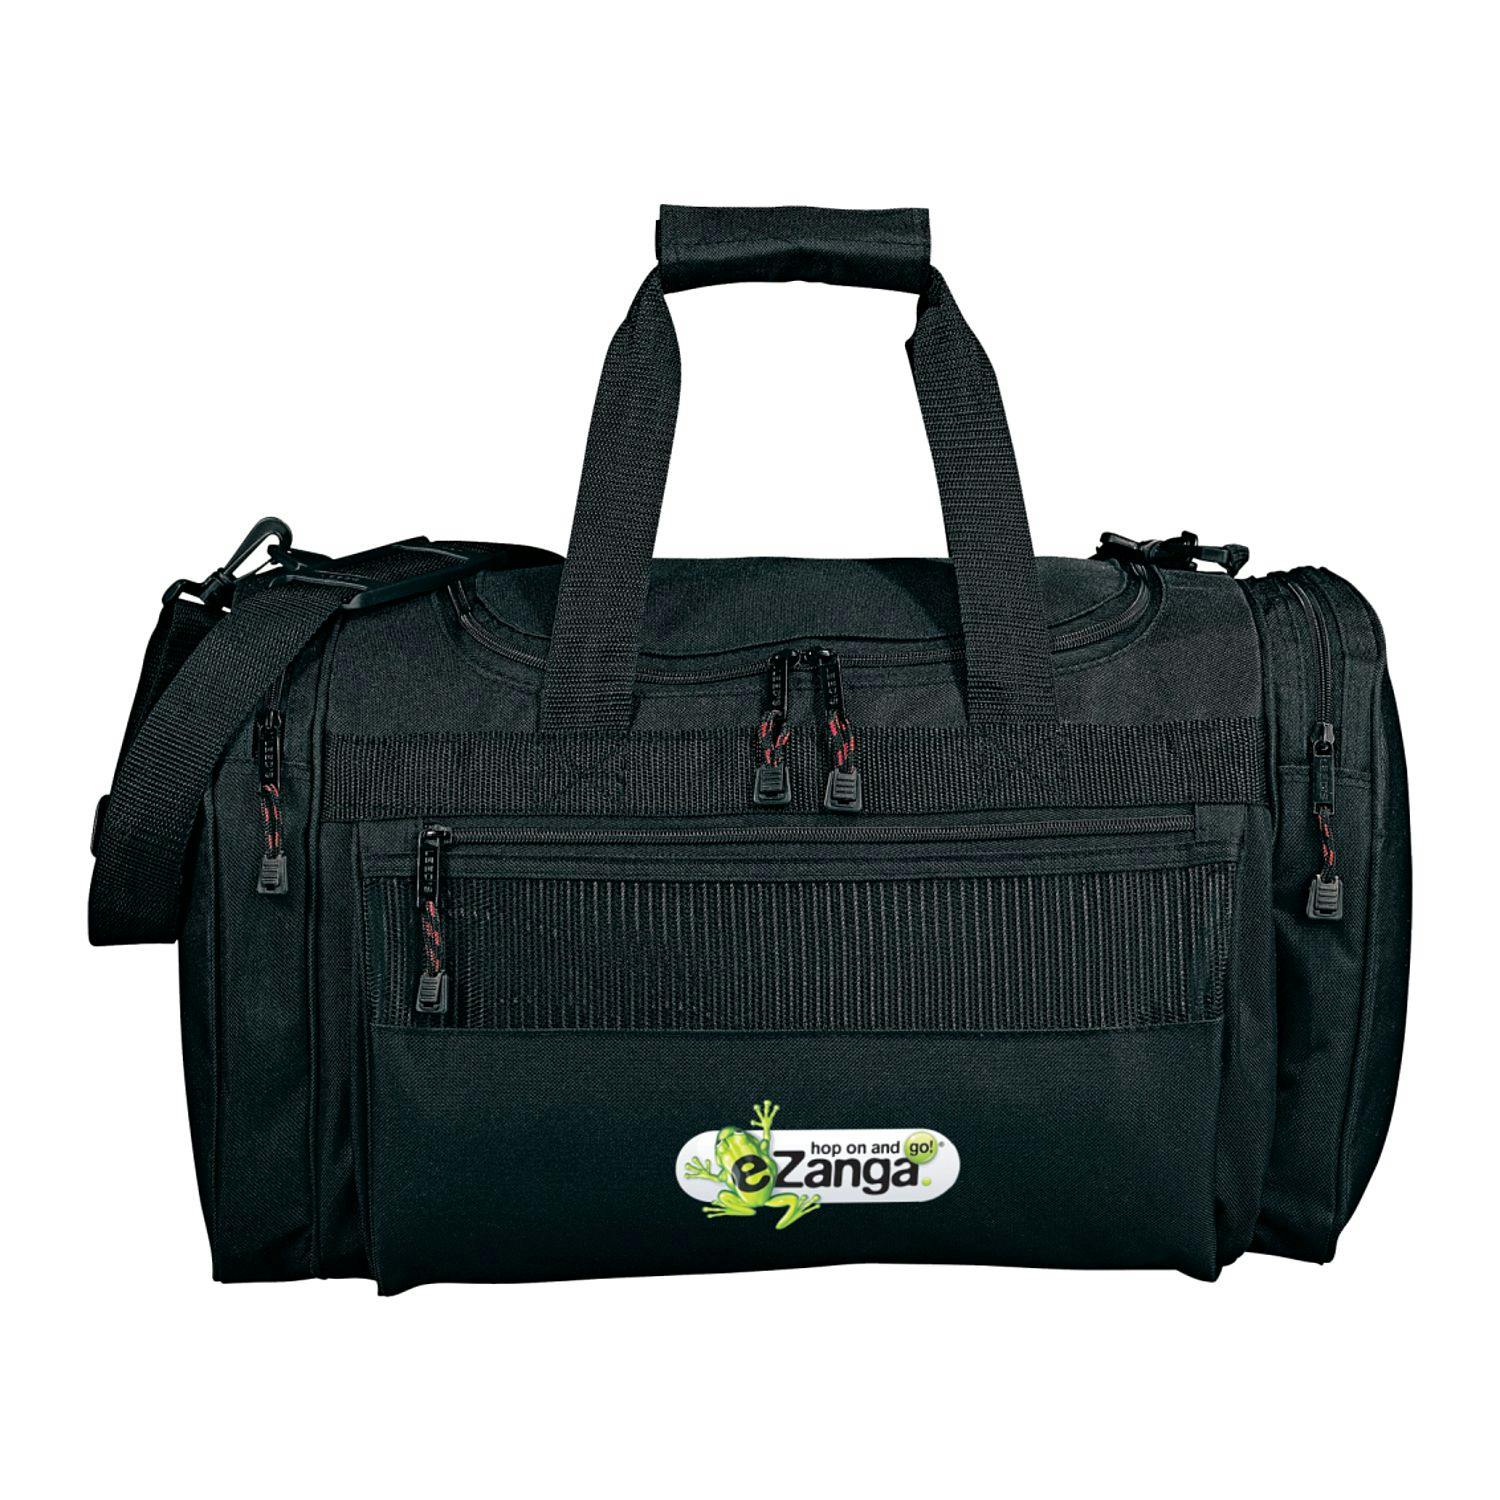 Excel Sport Deluxe 20" Duffel Bag - additional Image 3